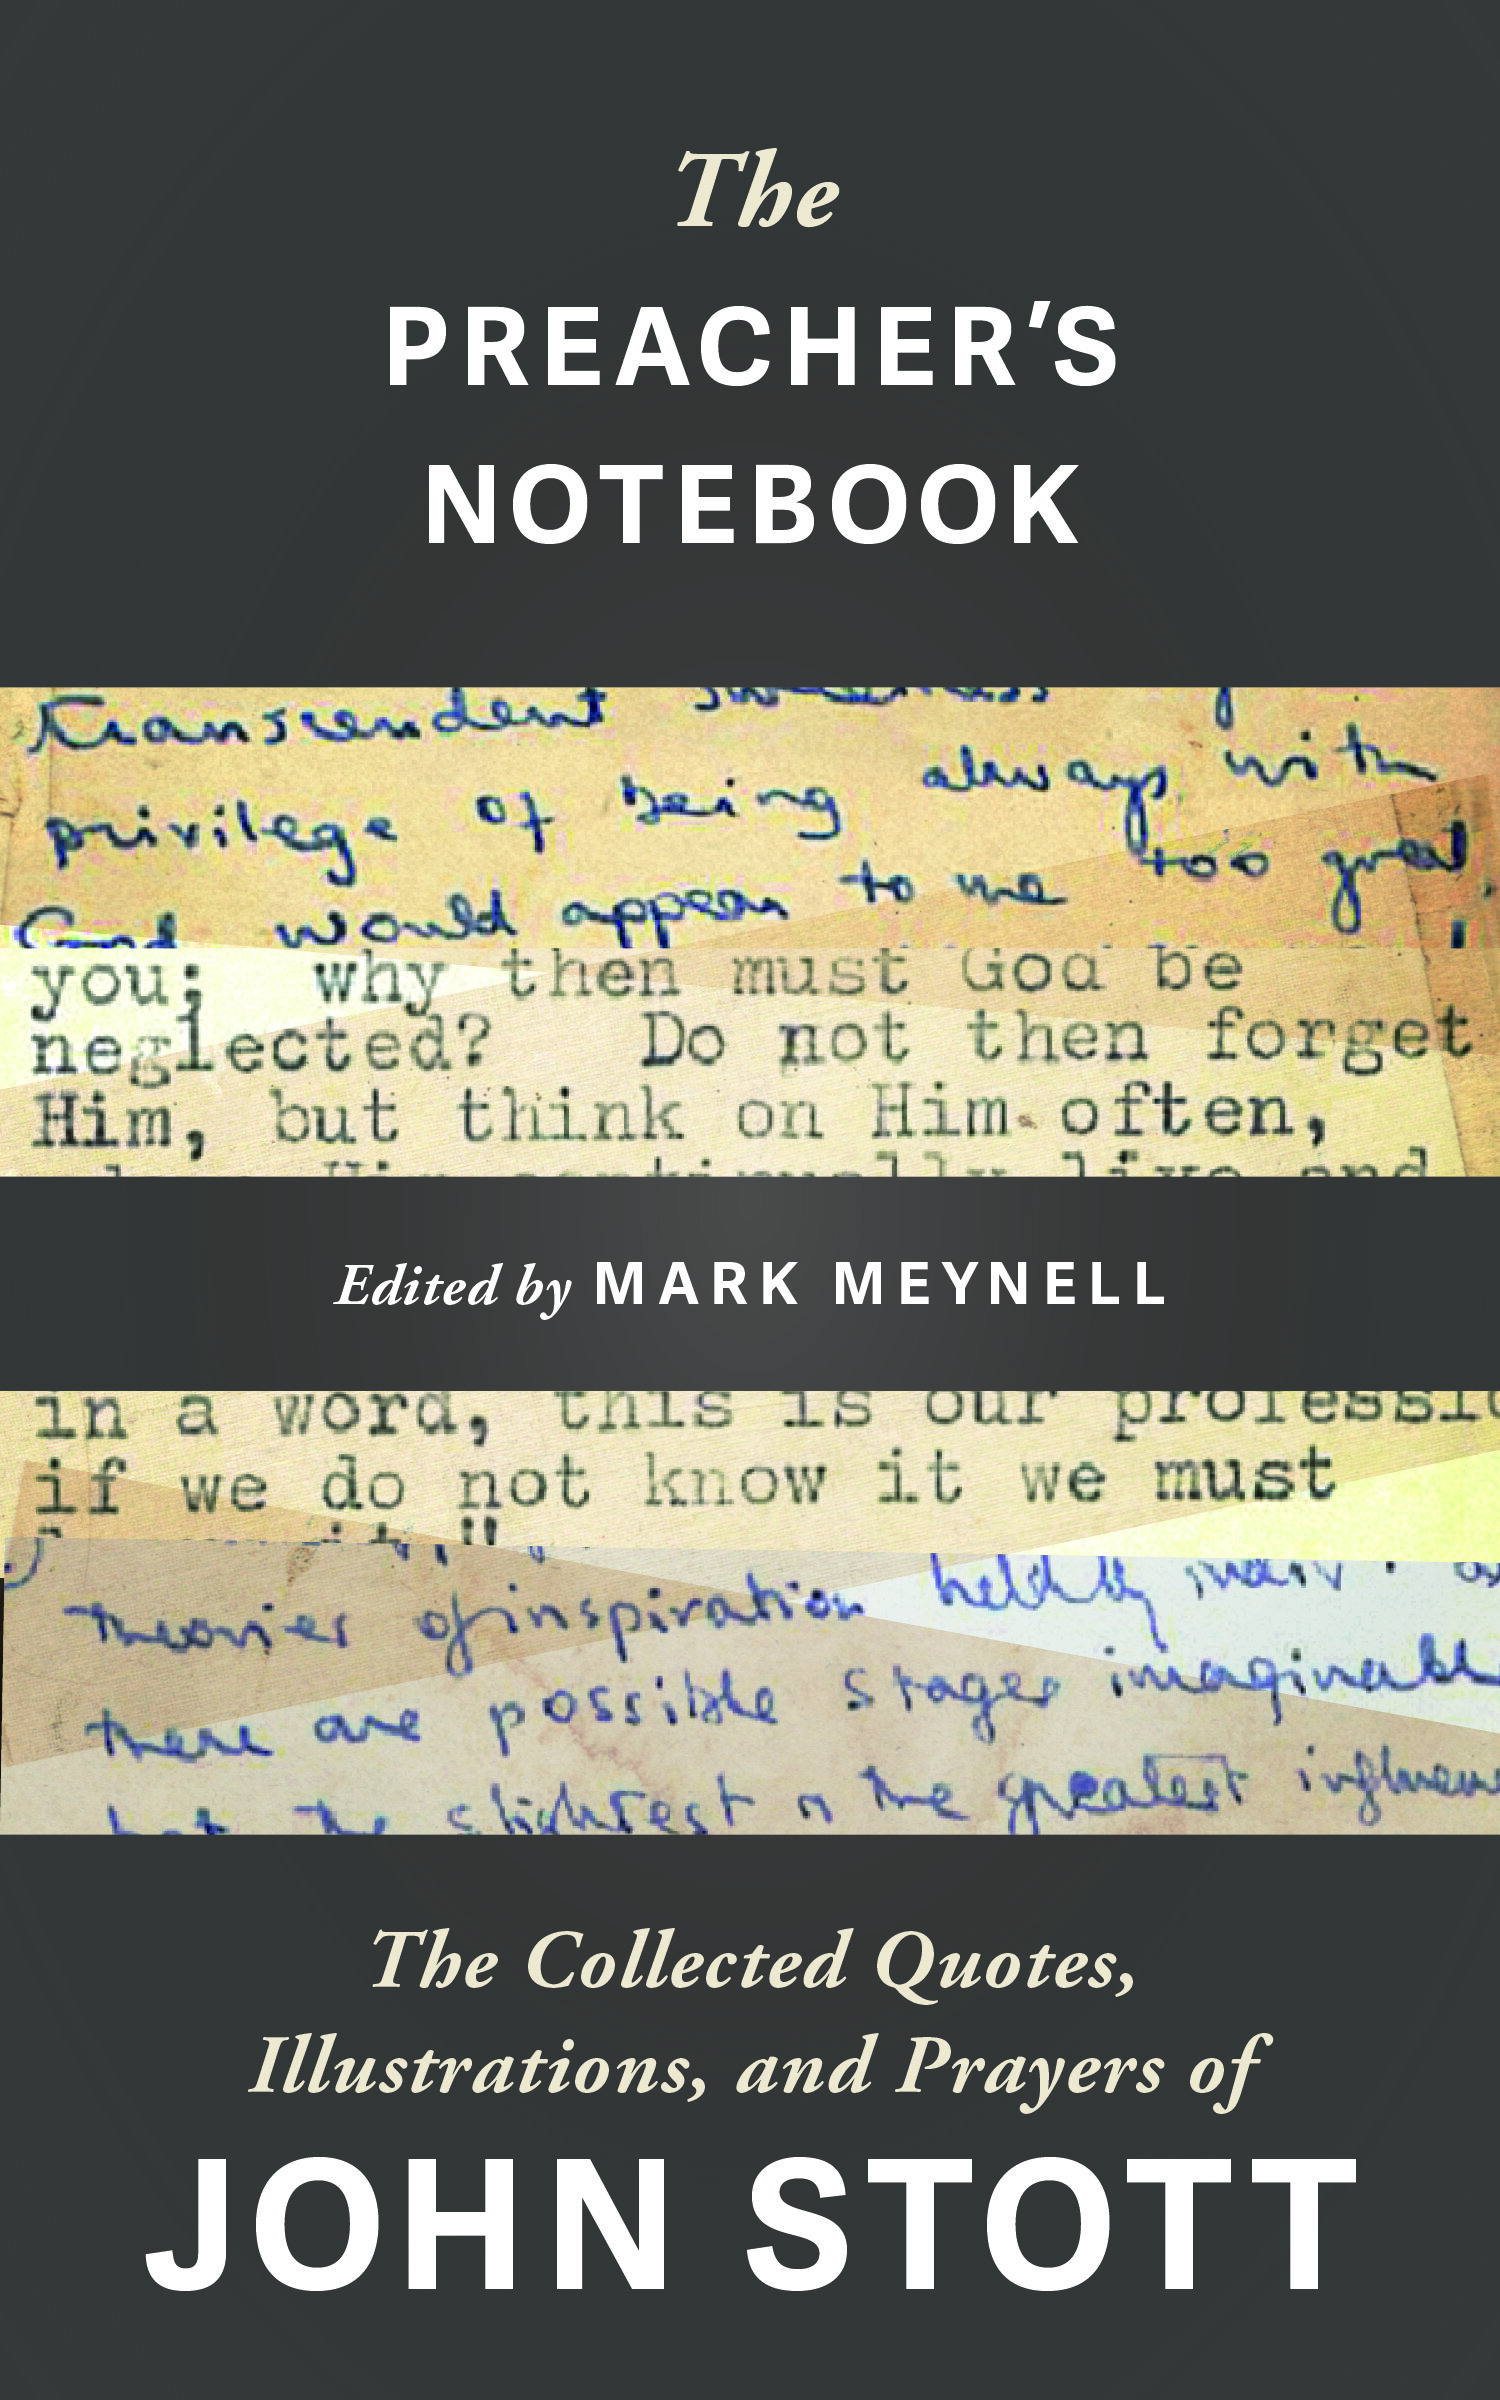 The Preacher’s Notebook: The Collected Quotes, Illustrations, and Prayers of John Stott